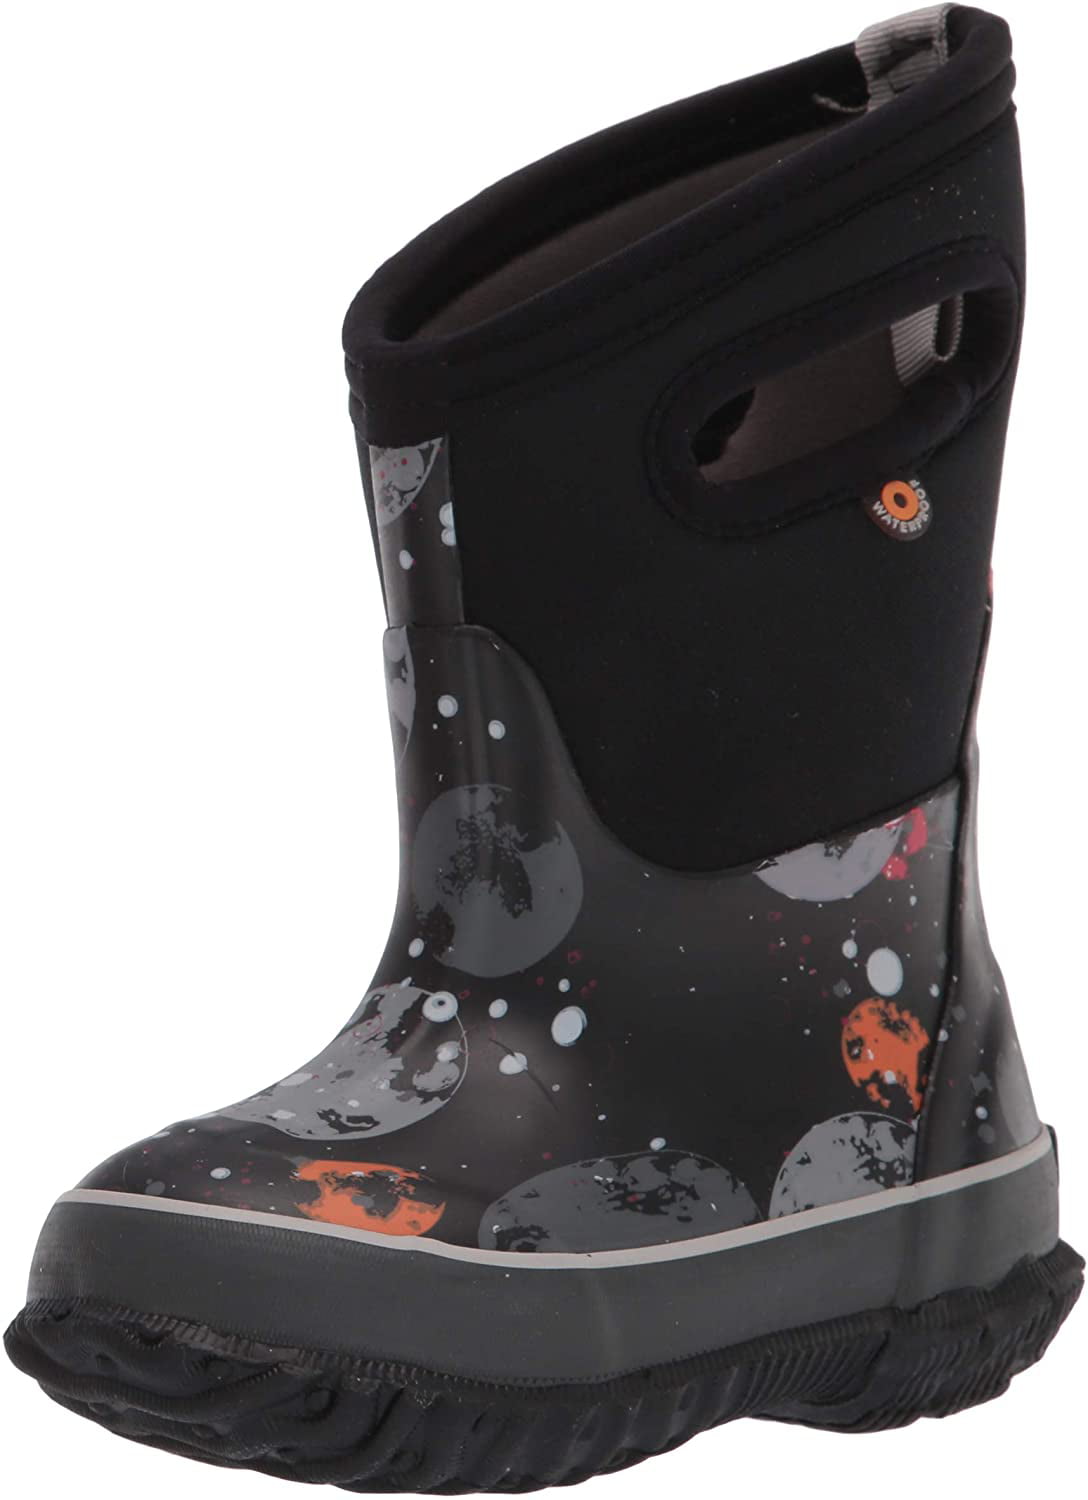 Bogs Unisex-Kids Boys Classic Prints Waterproof Insulated Snow Boot 